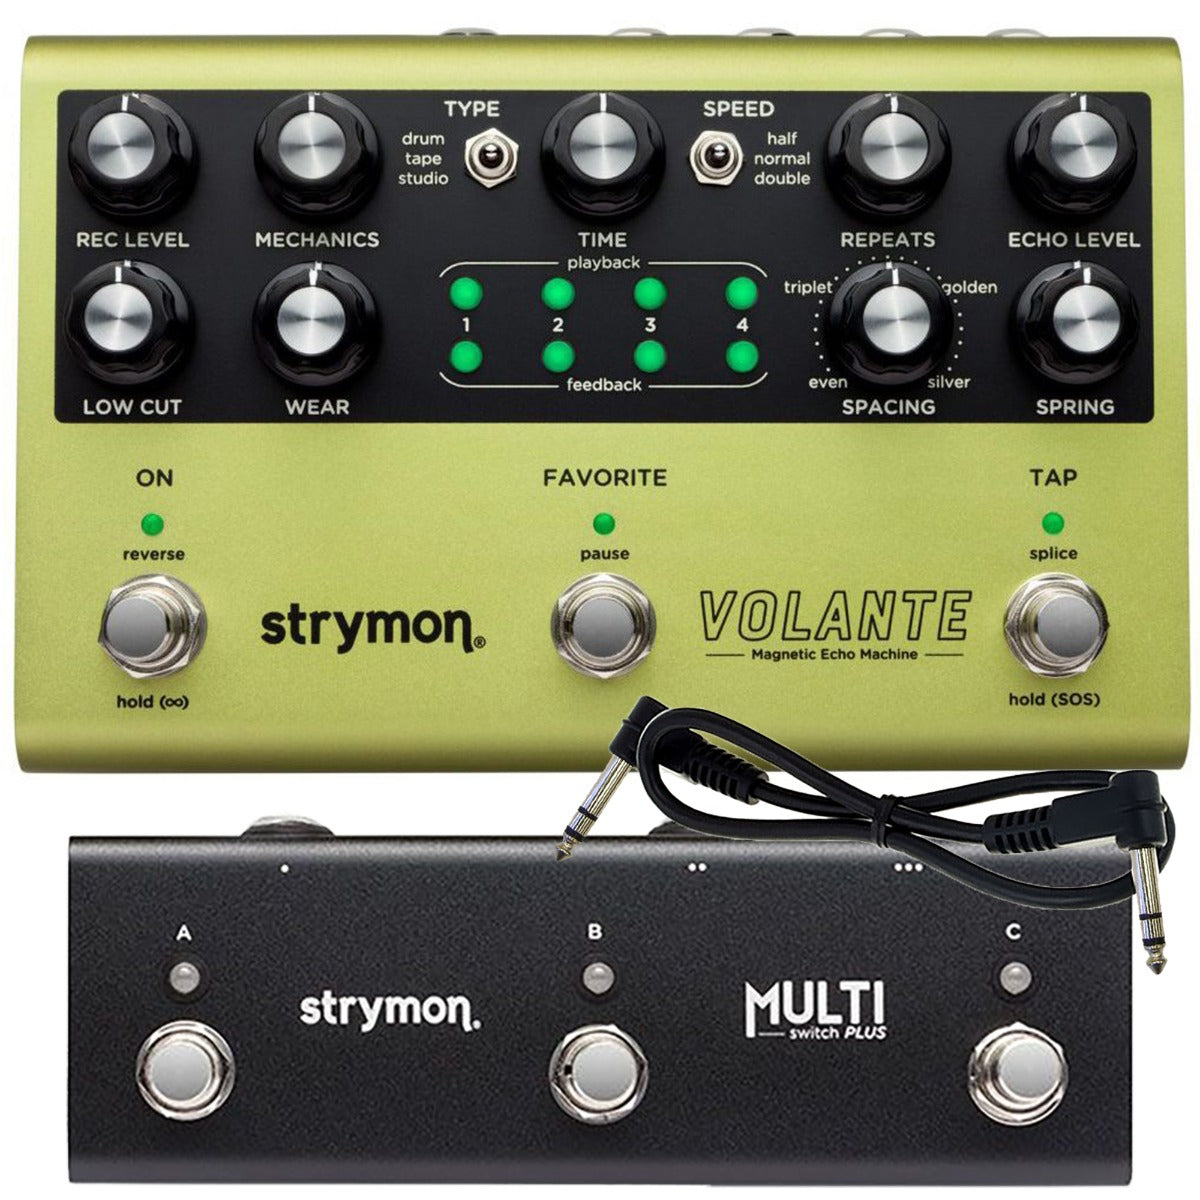 Collage of the components in the Strymon Volante Magnetic Echo Machine Pedal with Multiswitch Plus BUNDLE